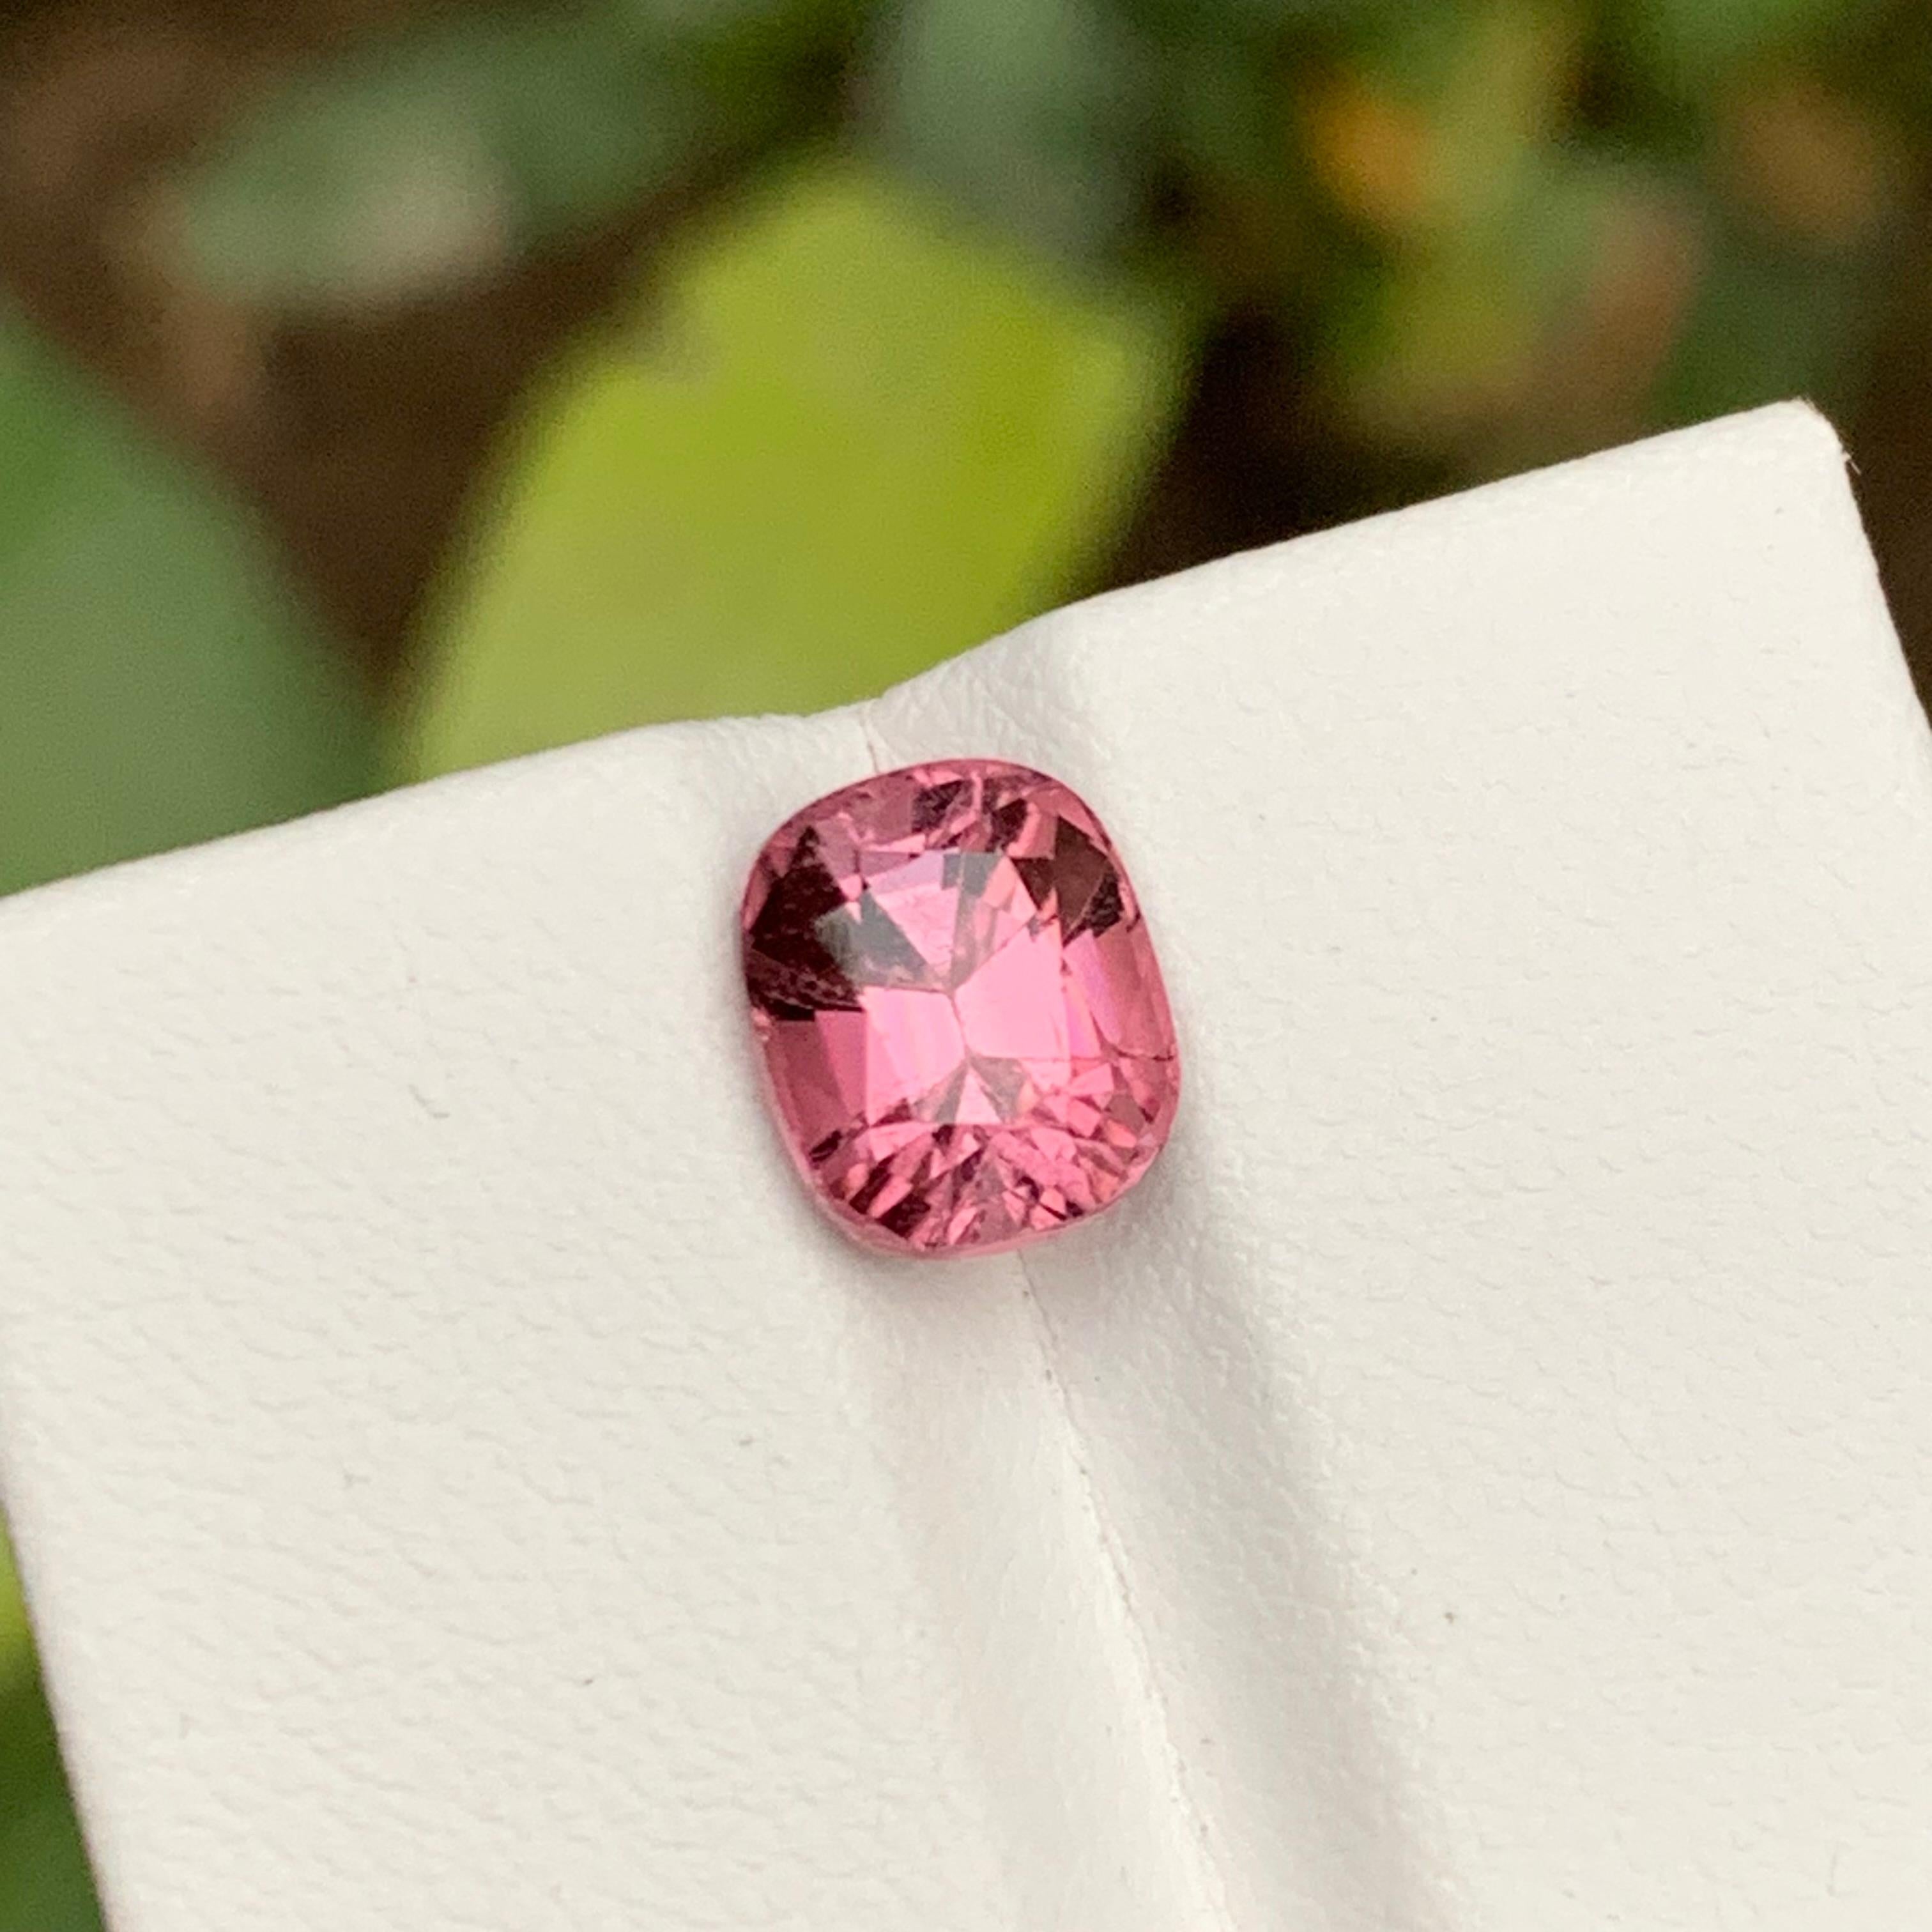 Gemstone Type: Tourmaline
Weight: 2.65 Carats
Dimensions: 8.61 x 7.16 x 6.19
Color: Pink
Clarity: Slightly Include 
Treatment: Heated
Origin: Afghanistan 🇦🇫 
Certificate: On demand 

Introducing our exquisite Rare Pink Afghan Tourmaline – a